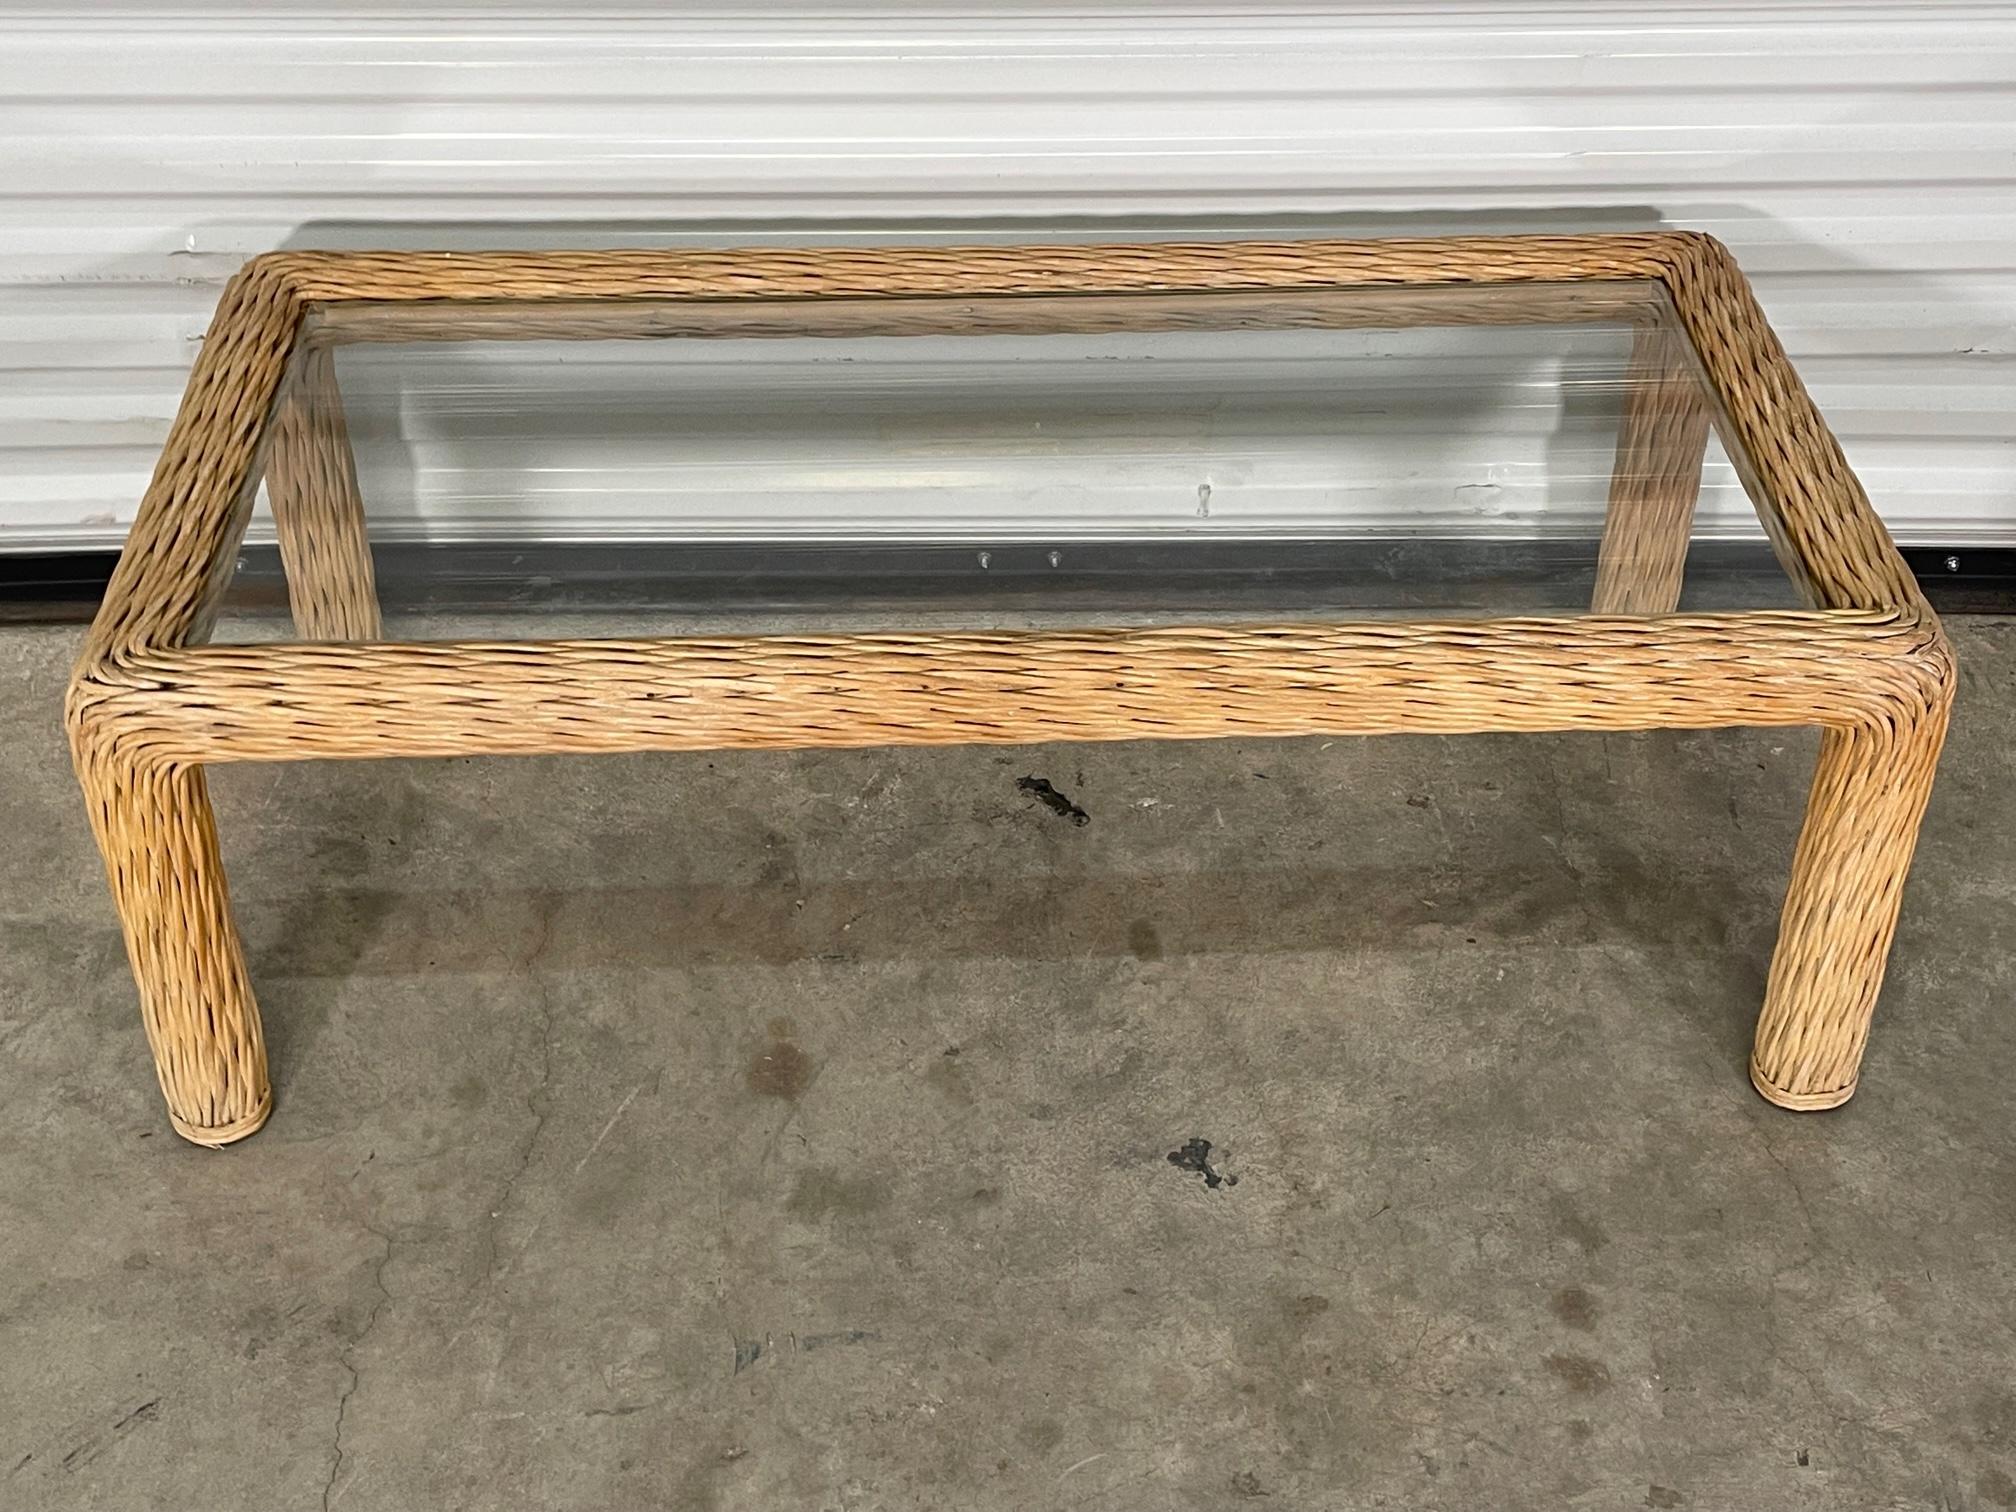 Organic modern coffee table features frame of twisted rattan and glass top. Good condition with imperfections consistent with age. May exhibit scuffs, marks, or wear, see photos for details. We offer professional refinishing services.
  